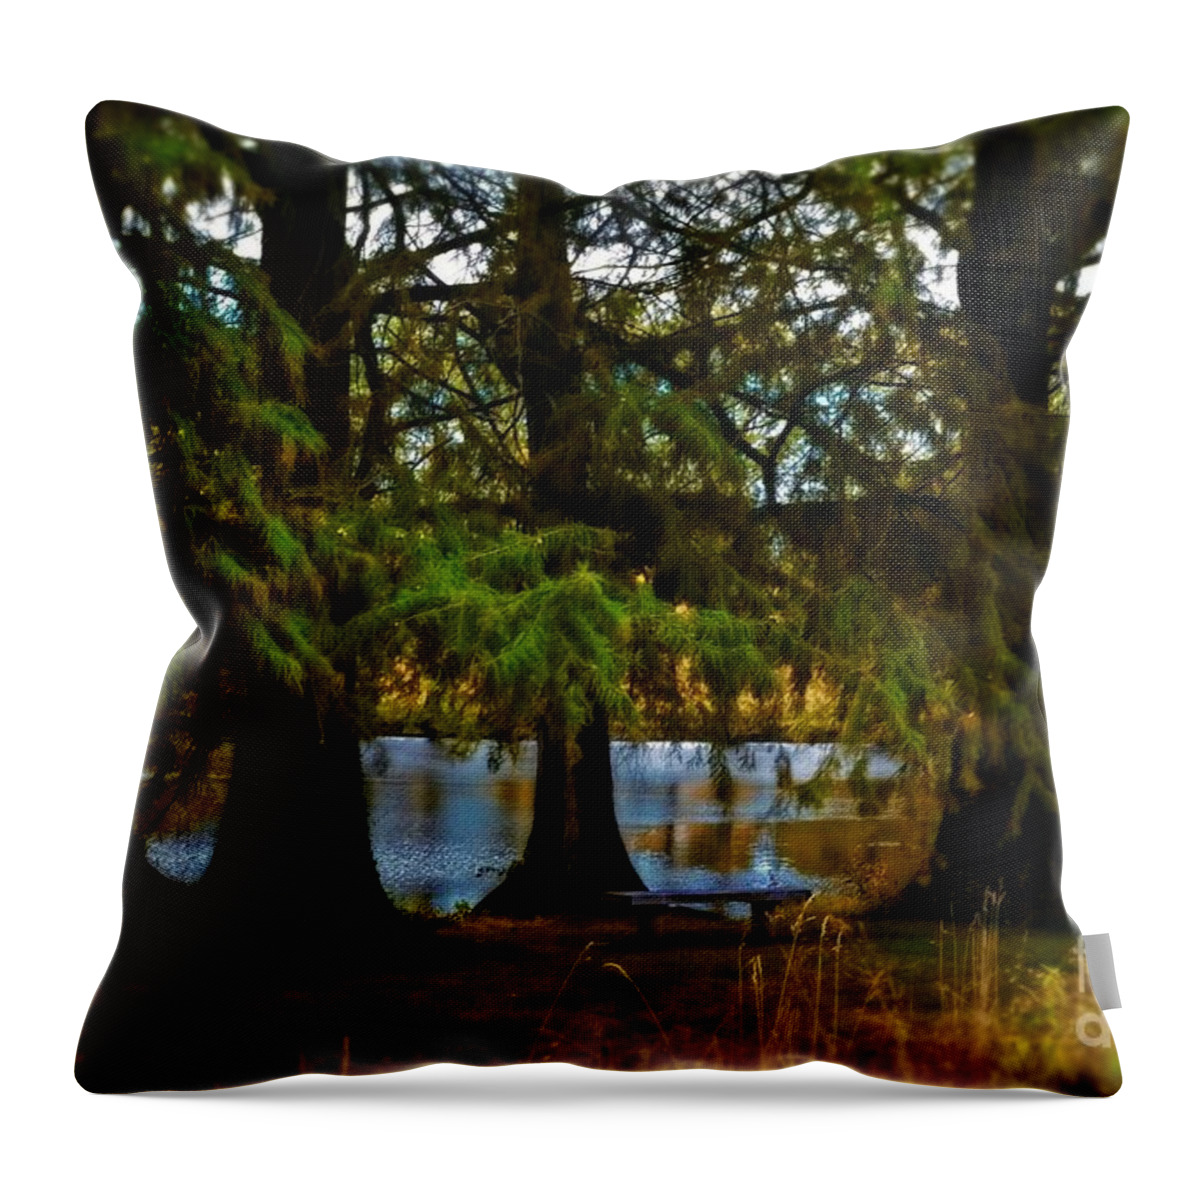  Tranquil Landscape Throw Pillow featuring the photograph Tranquil and Serene by Peggy Franz